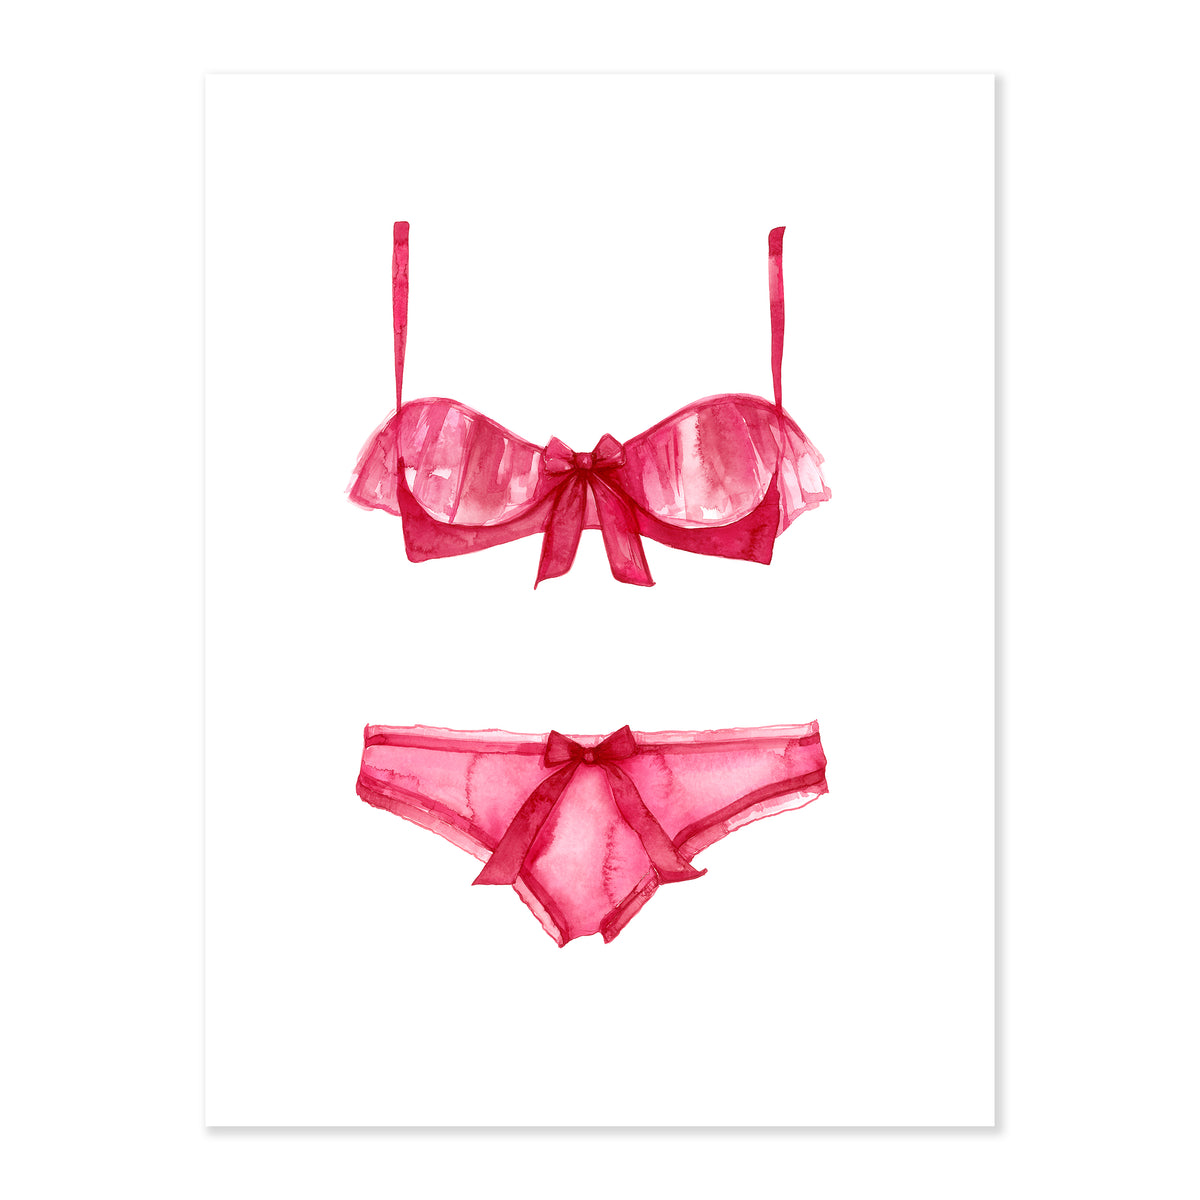 A fine art print illustrating a red lingerie set featuring bow details painted with watercolors on a soft white background